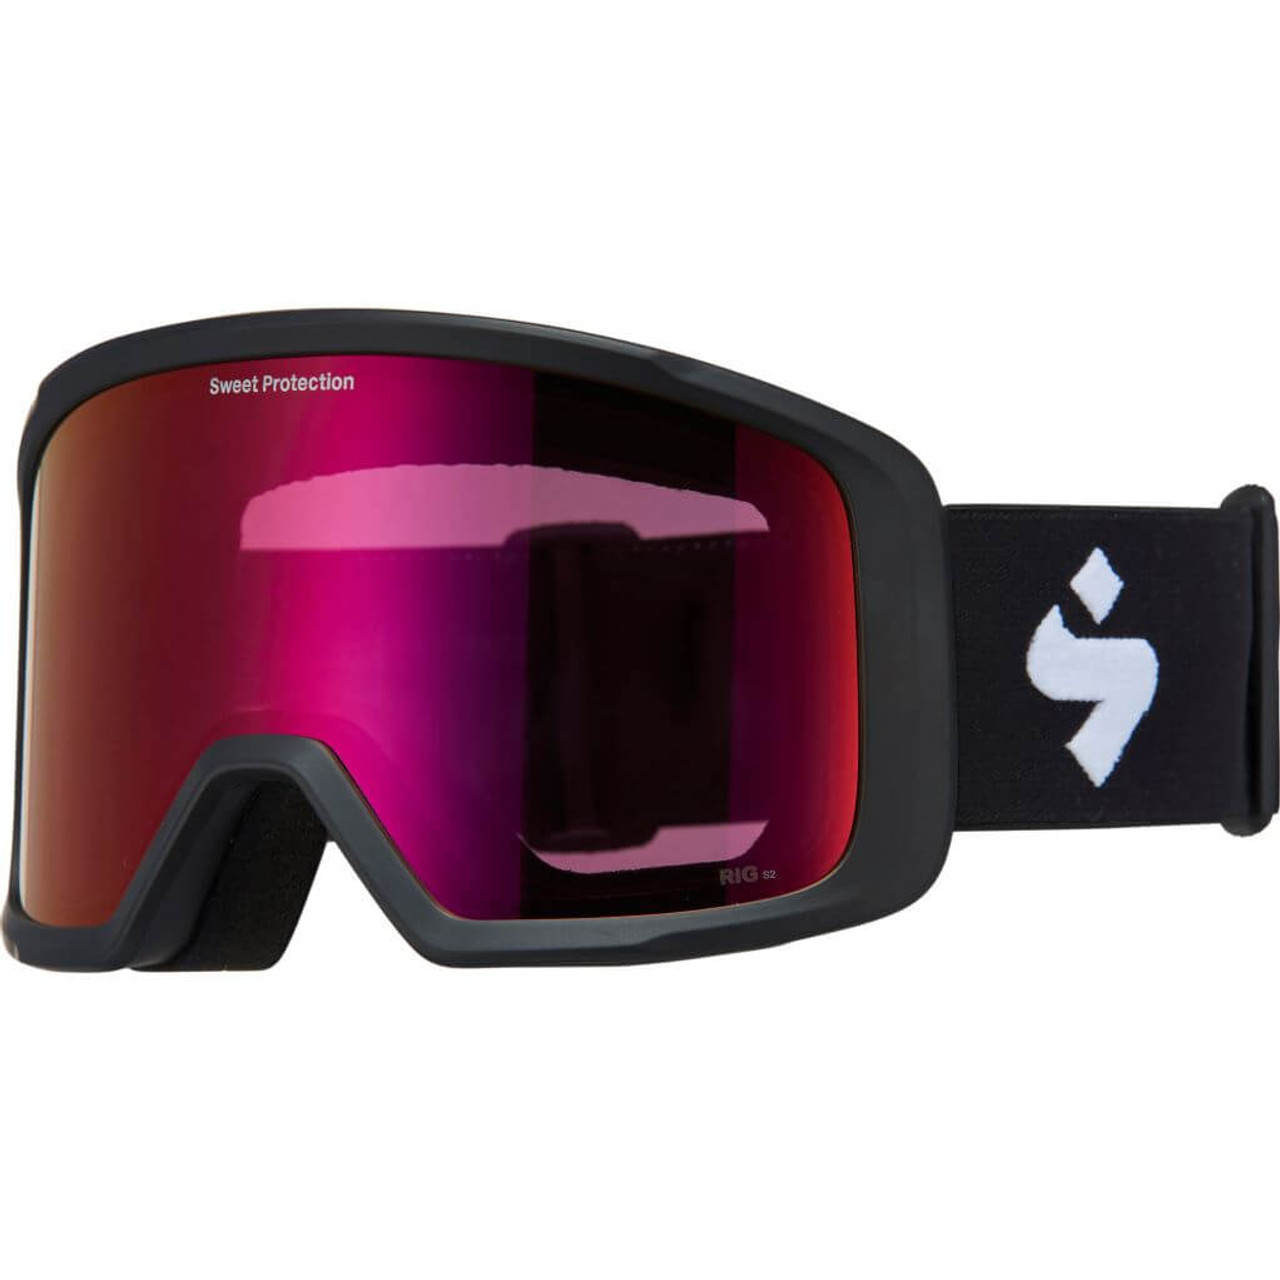 Sweet Protection Firewall RIG Reflect Snow Goggles